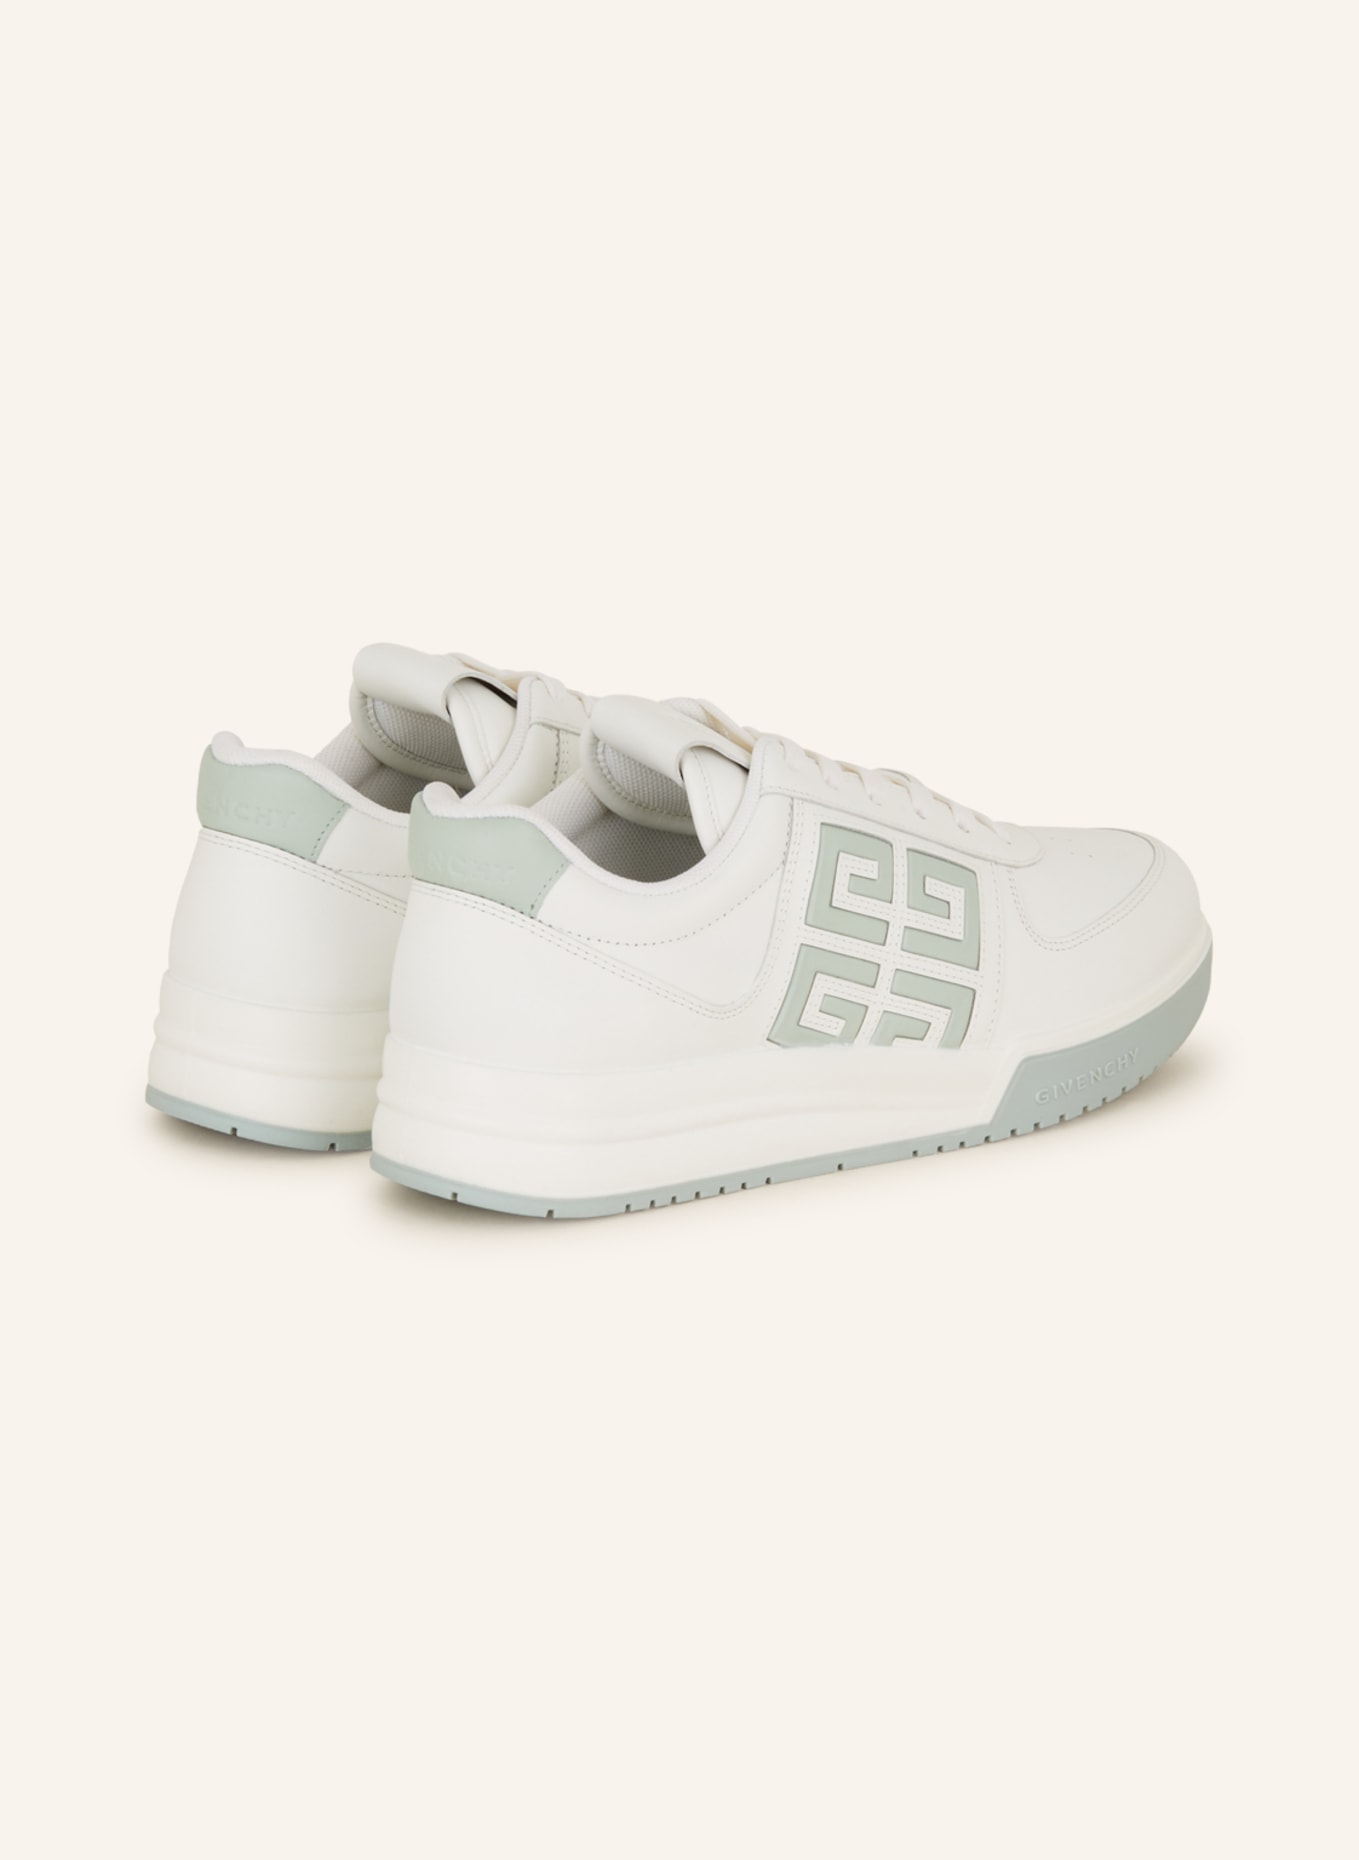 GIVENCHY Sneaker G4 , Farbe: WEISS/ MINT (Bild 2)